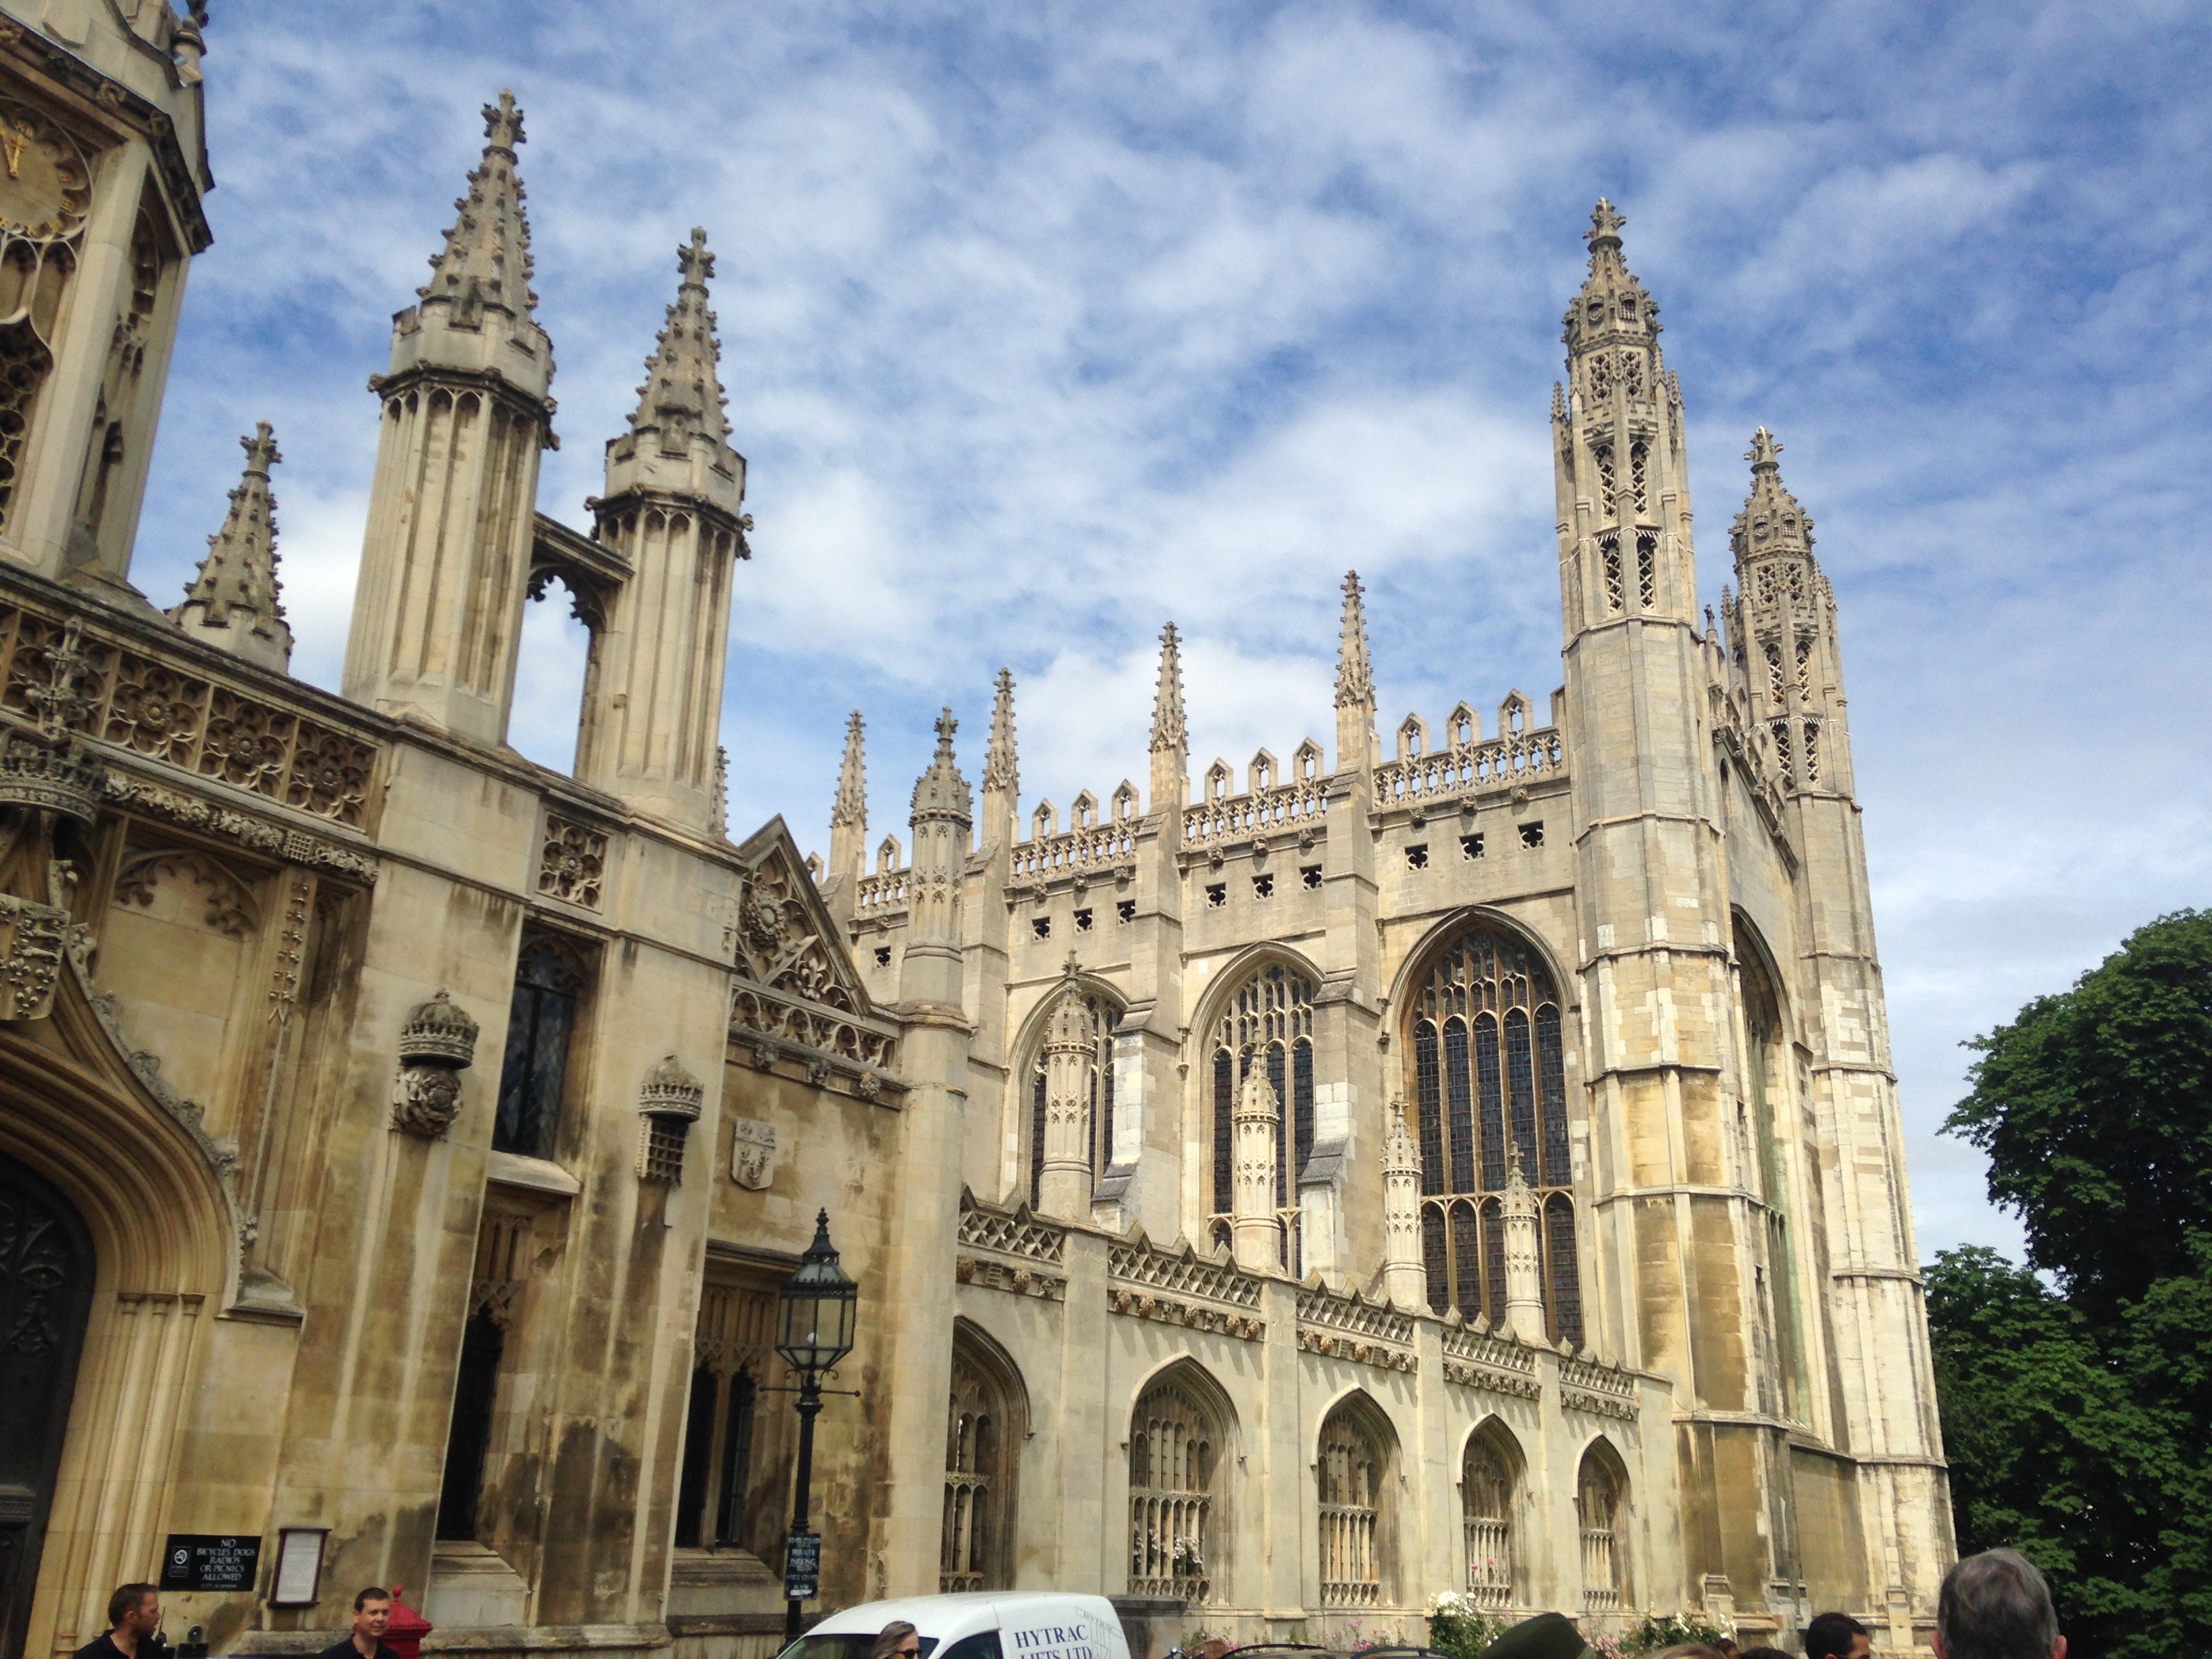 King's College, part of the University of Cambridge